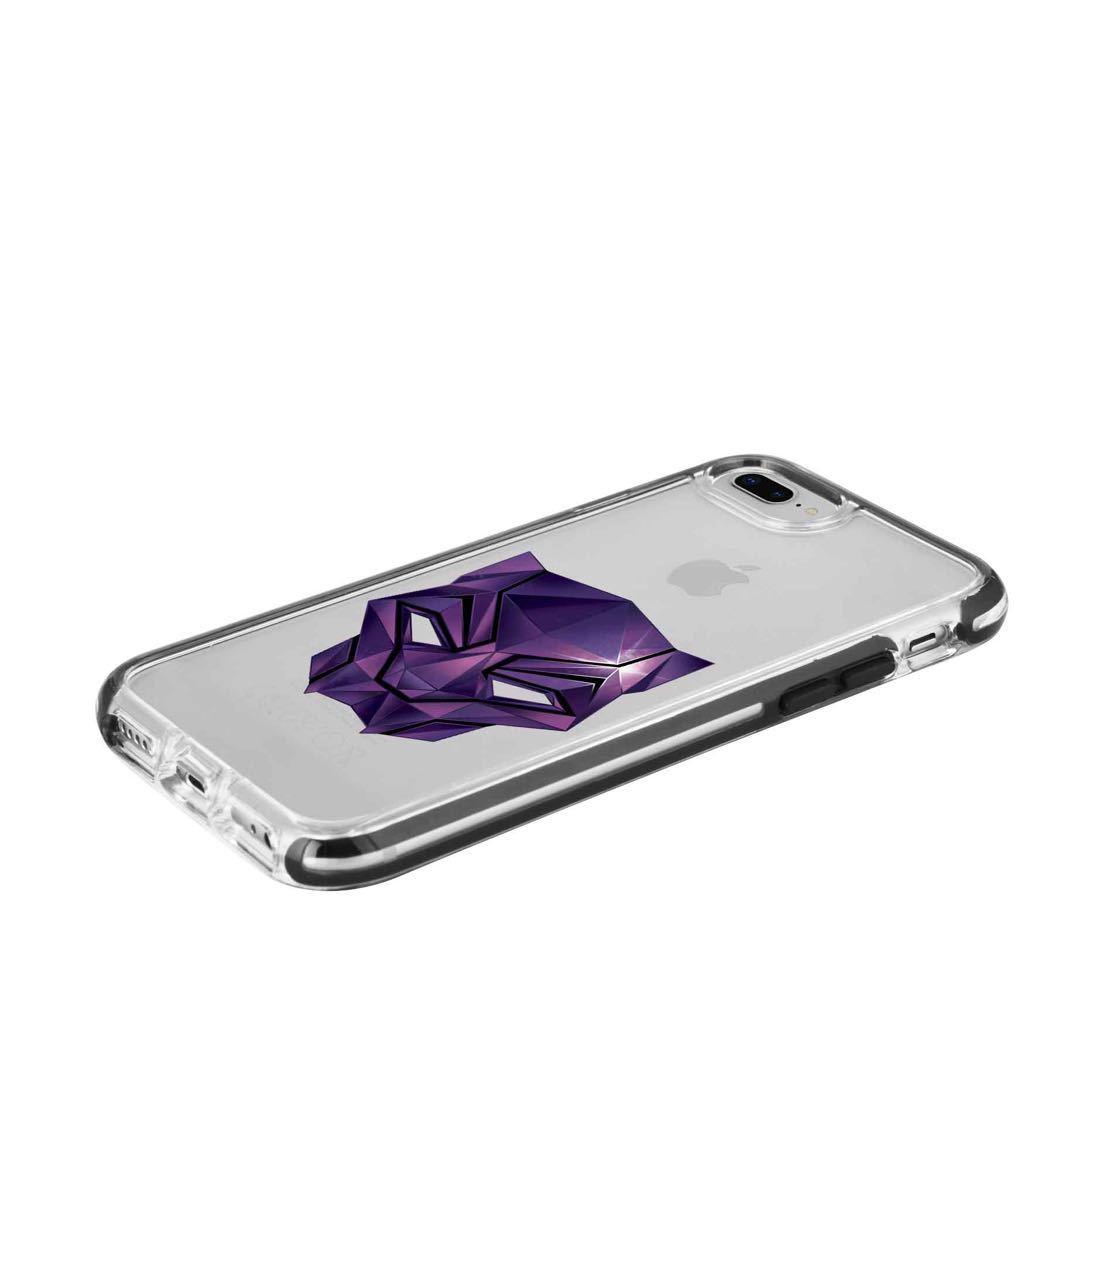 Black Panther Logo - Extreme Phone Case for iPhone 8 Plus